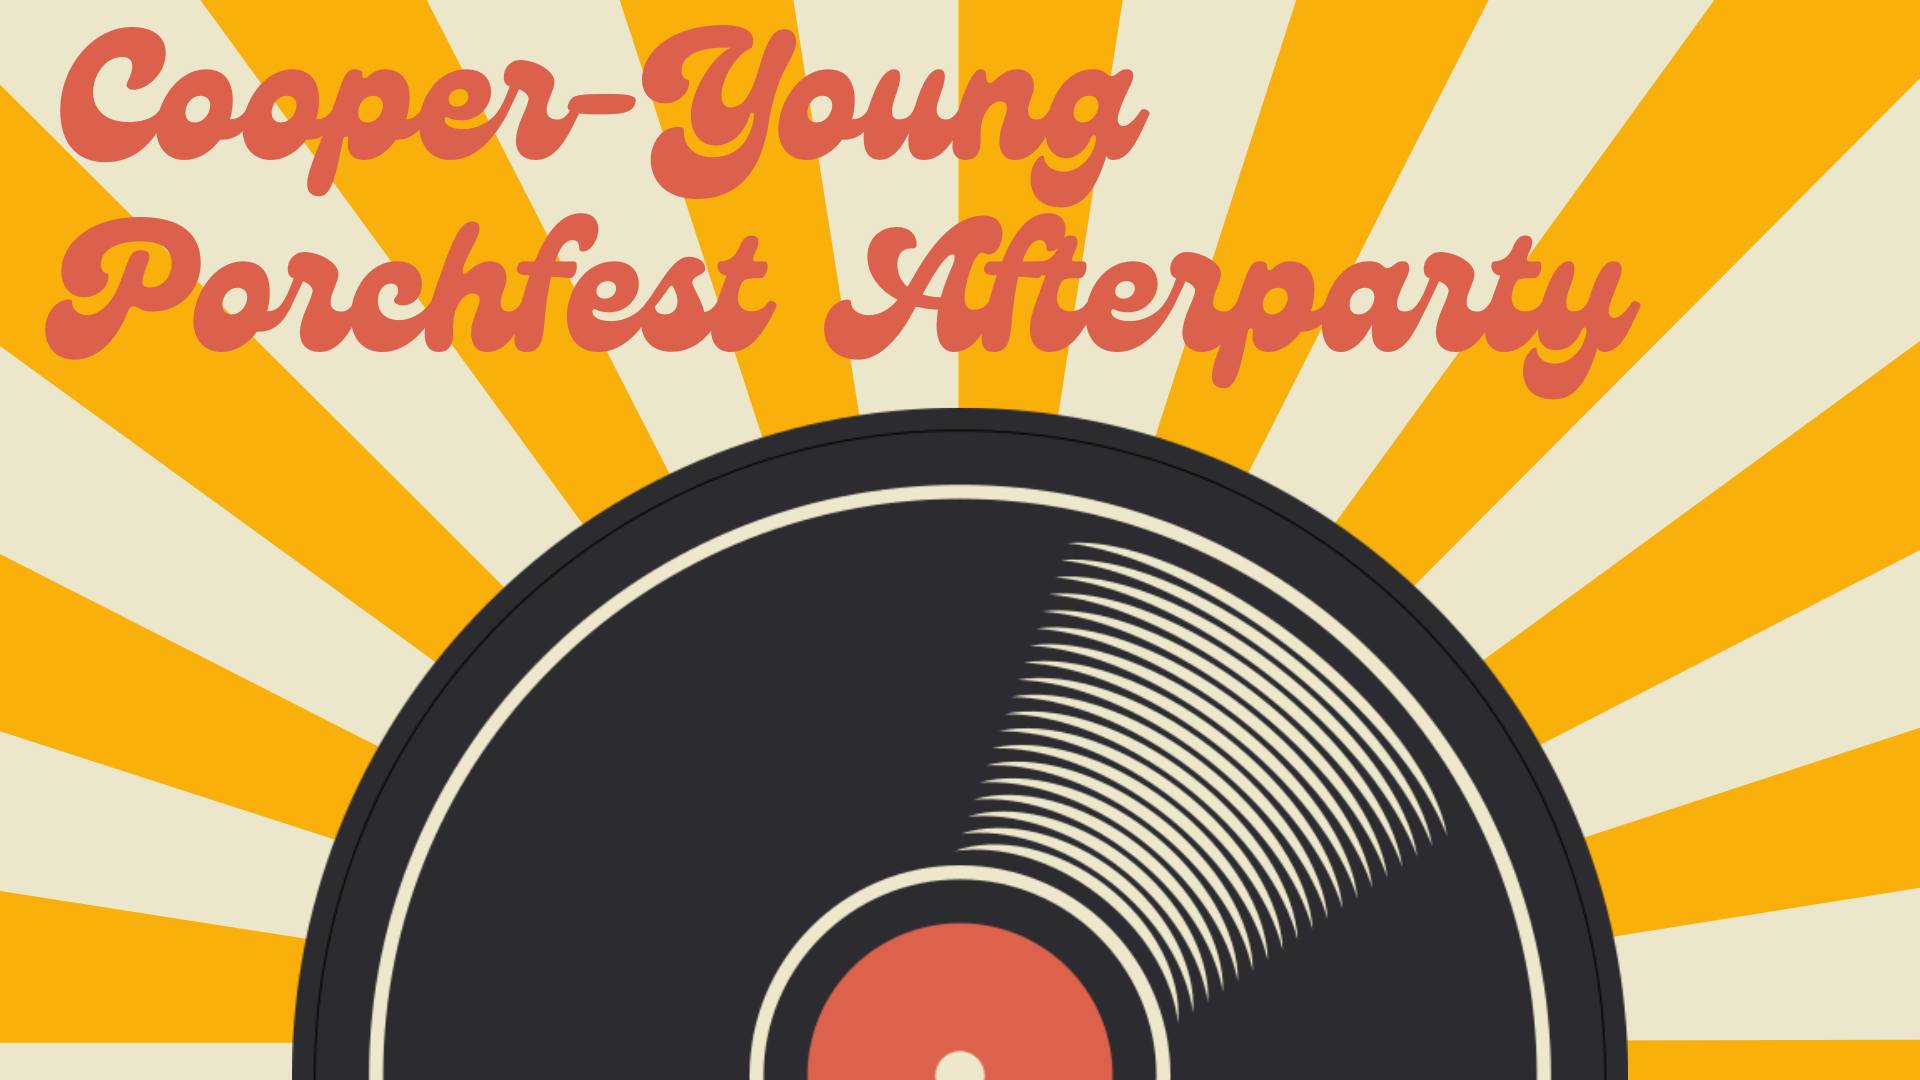 Graphic for "Cooper-Young Porchfest afterparty" featuring a vinyl record on a background with yellow rays and orange text.